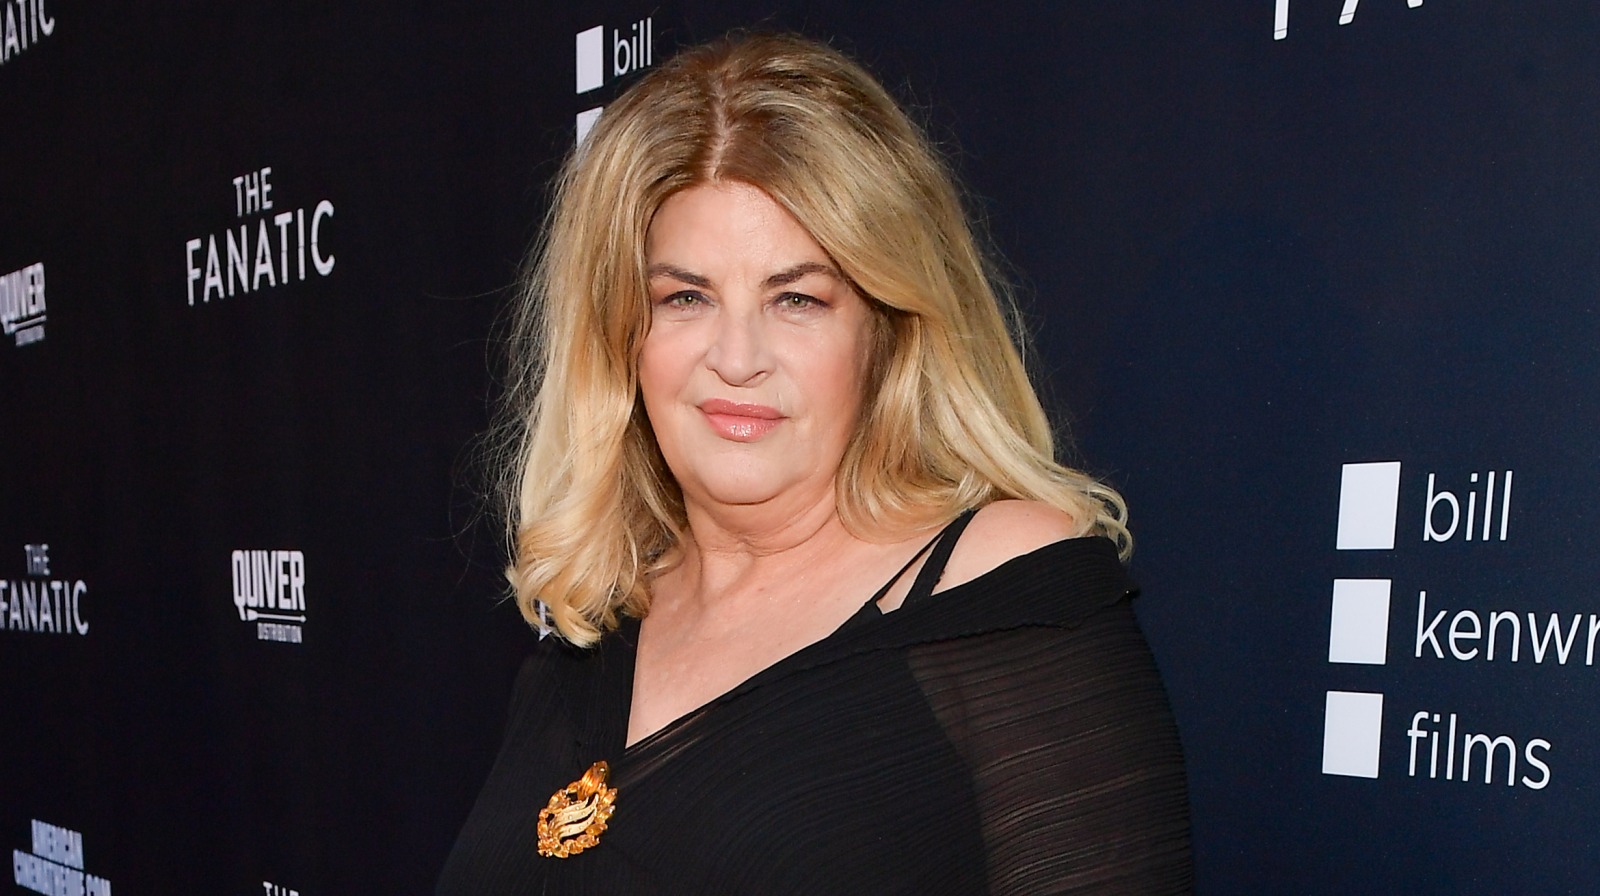 Kirstie Alley's Most Controversial Moments